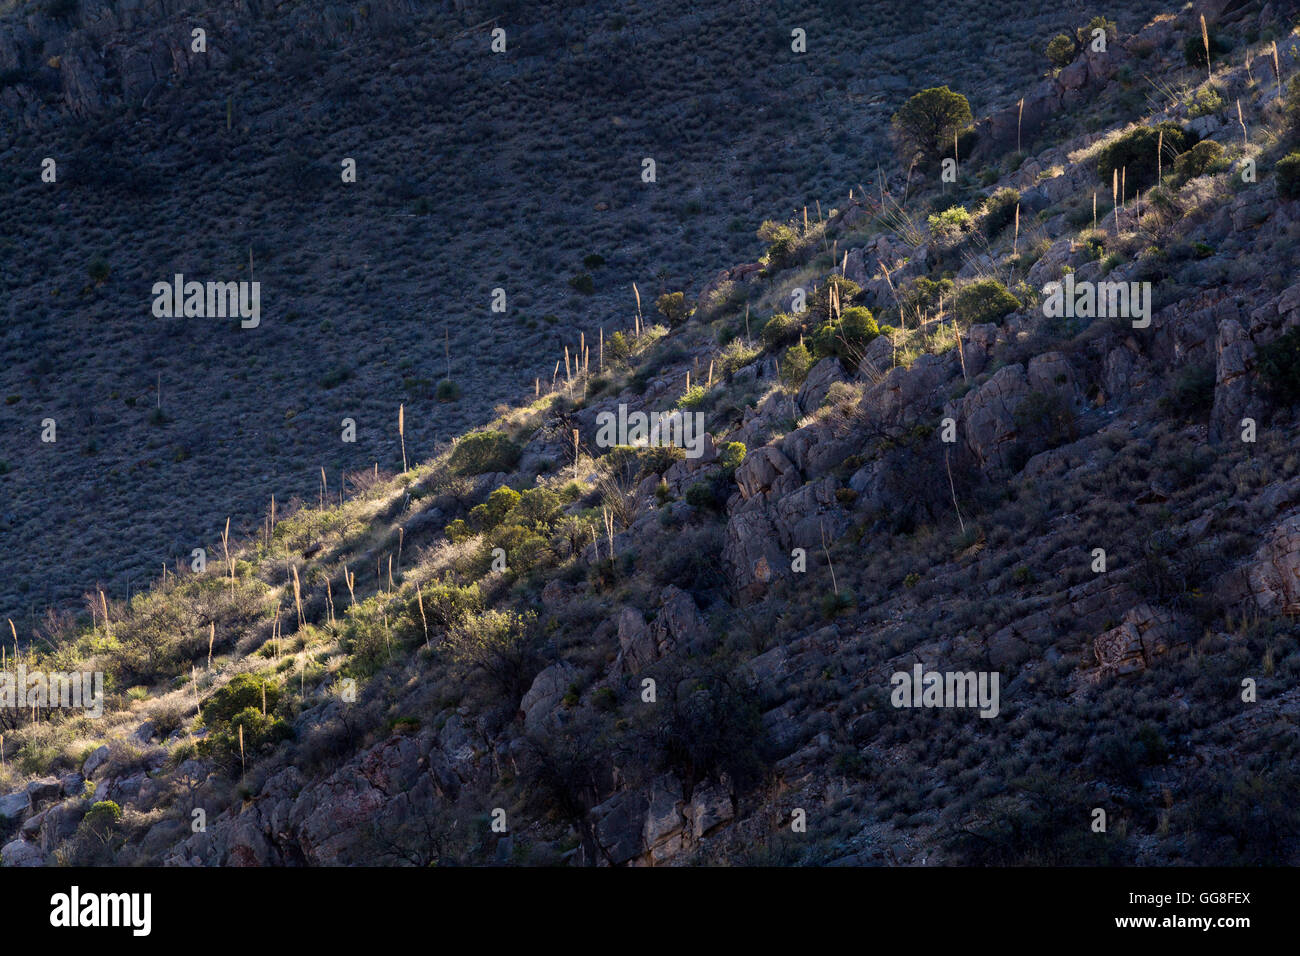 Backlit yucca stalks rising from the ground on a rocky outcropping. Colossal Cave Mountain Park, Arizona Stock Photo